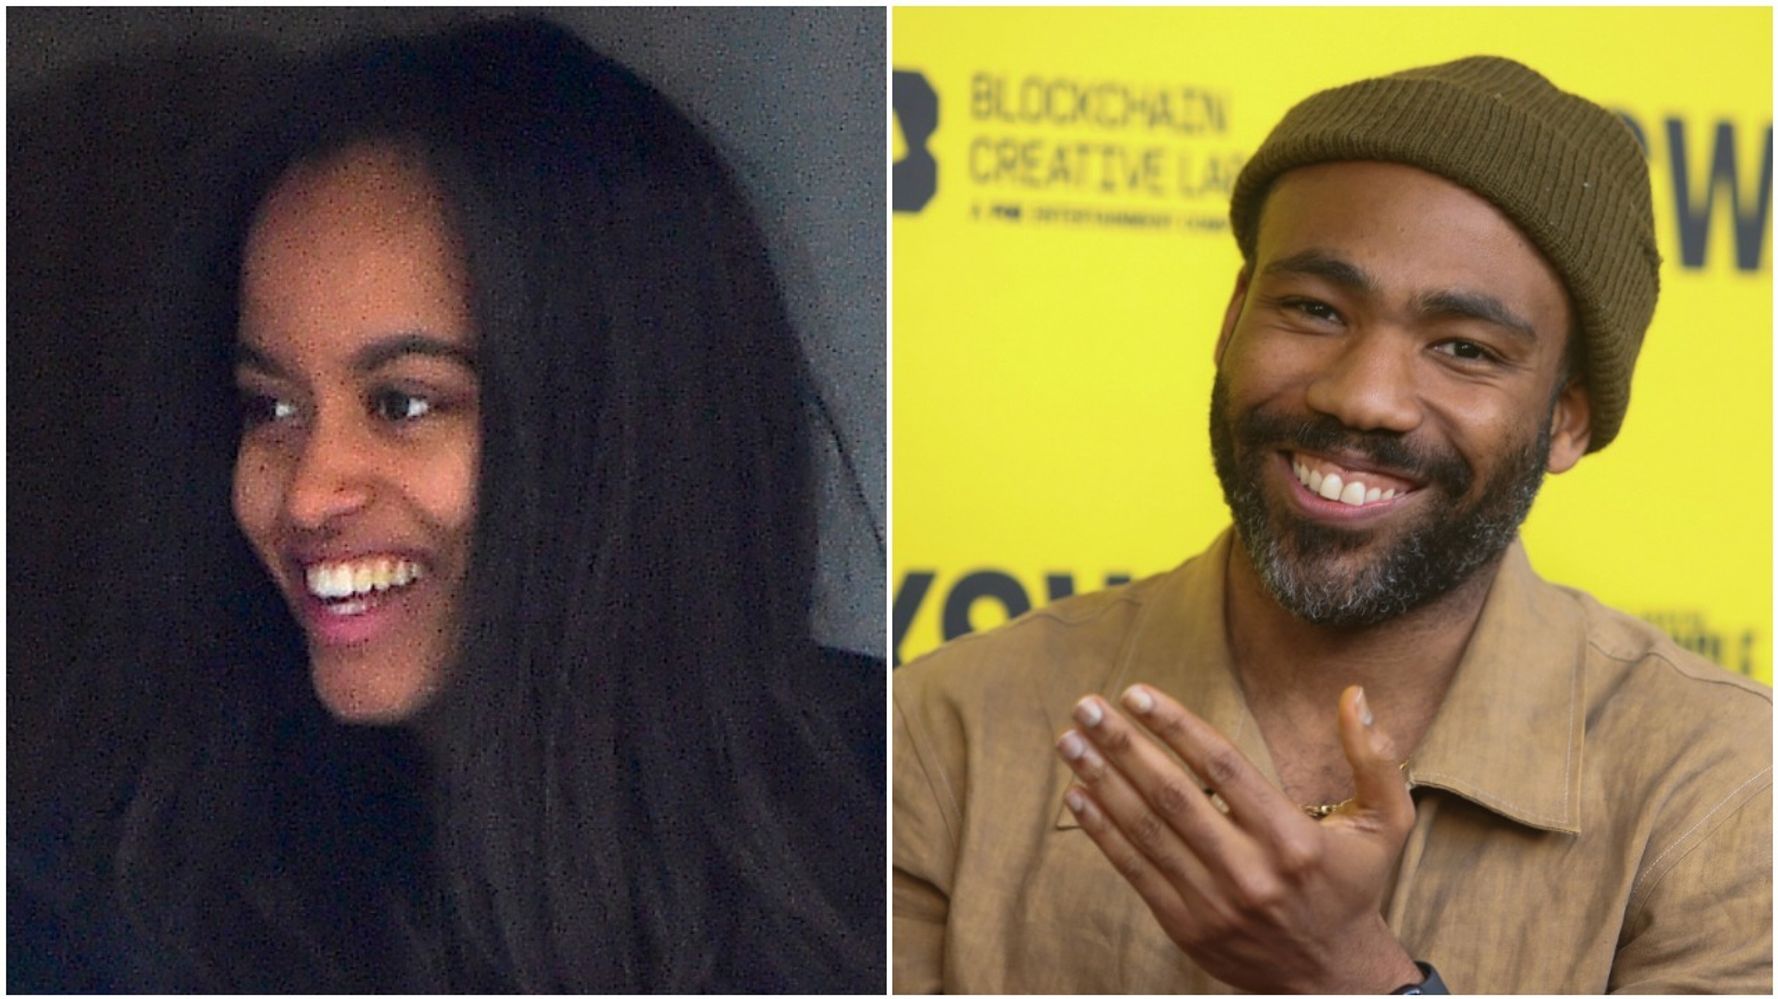 Malia Obama Will Be A Writer On Donald Glover's New Show